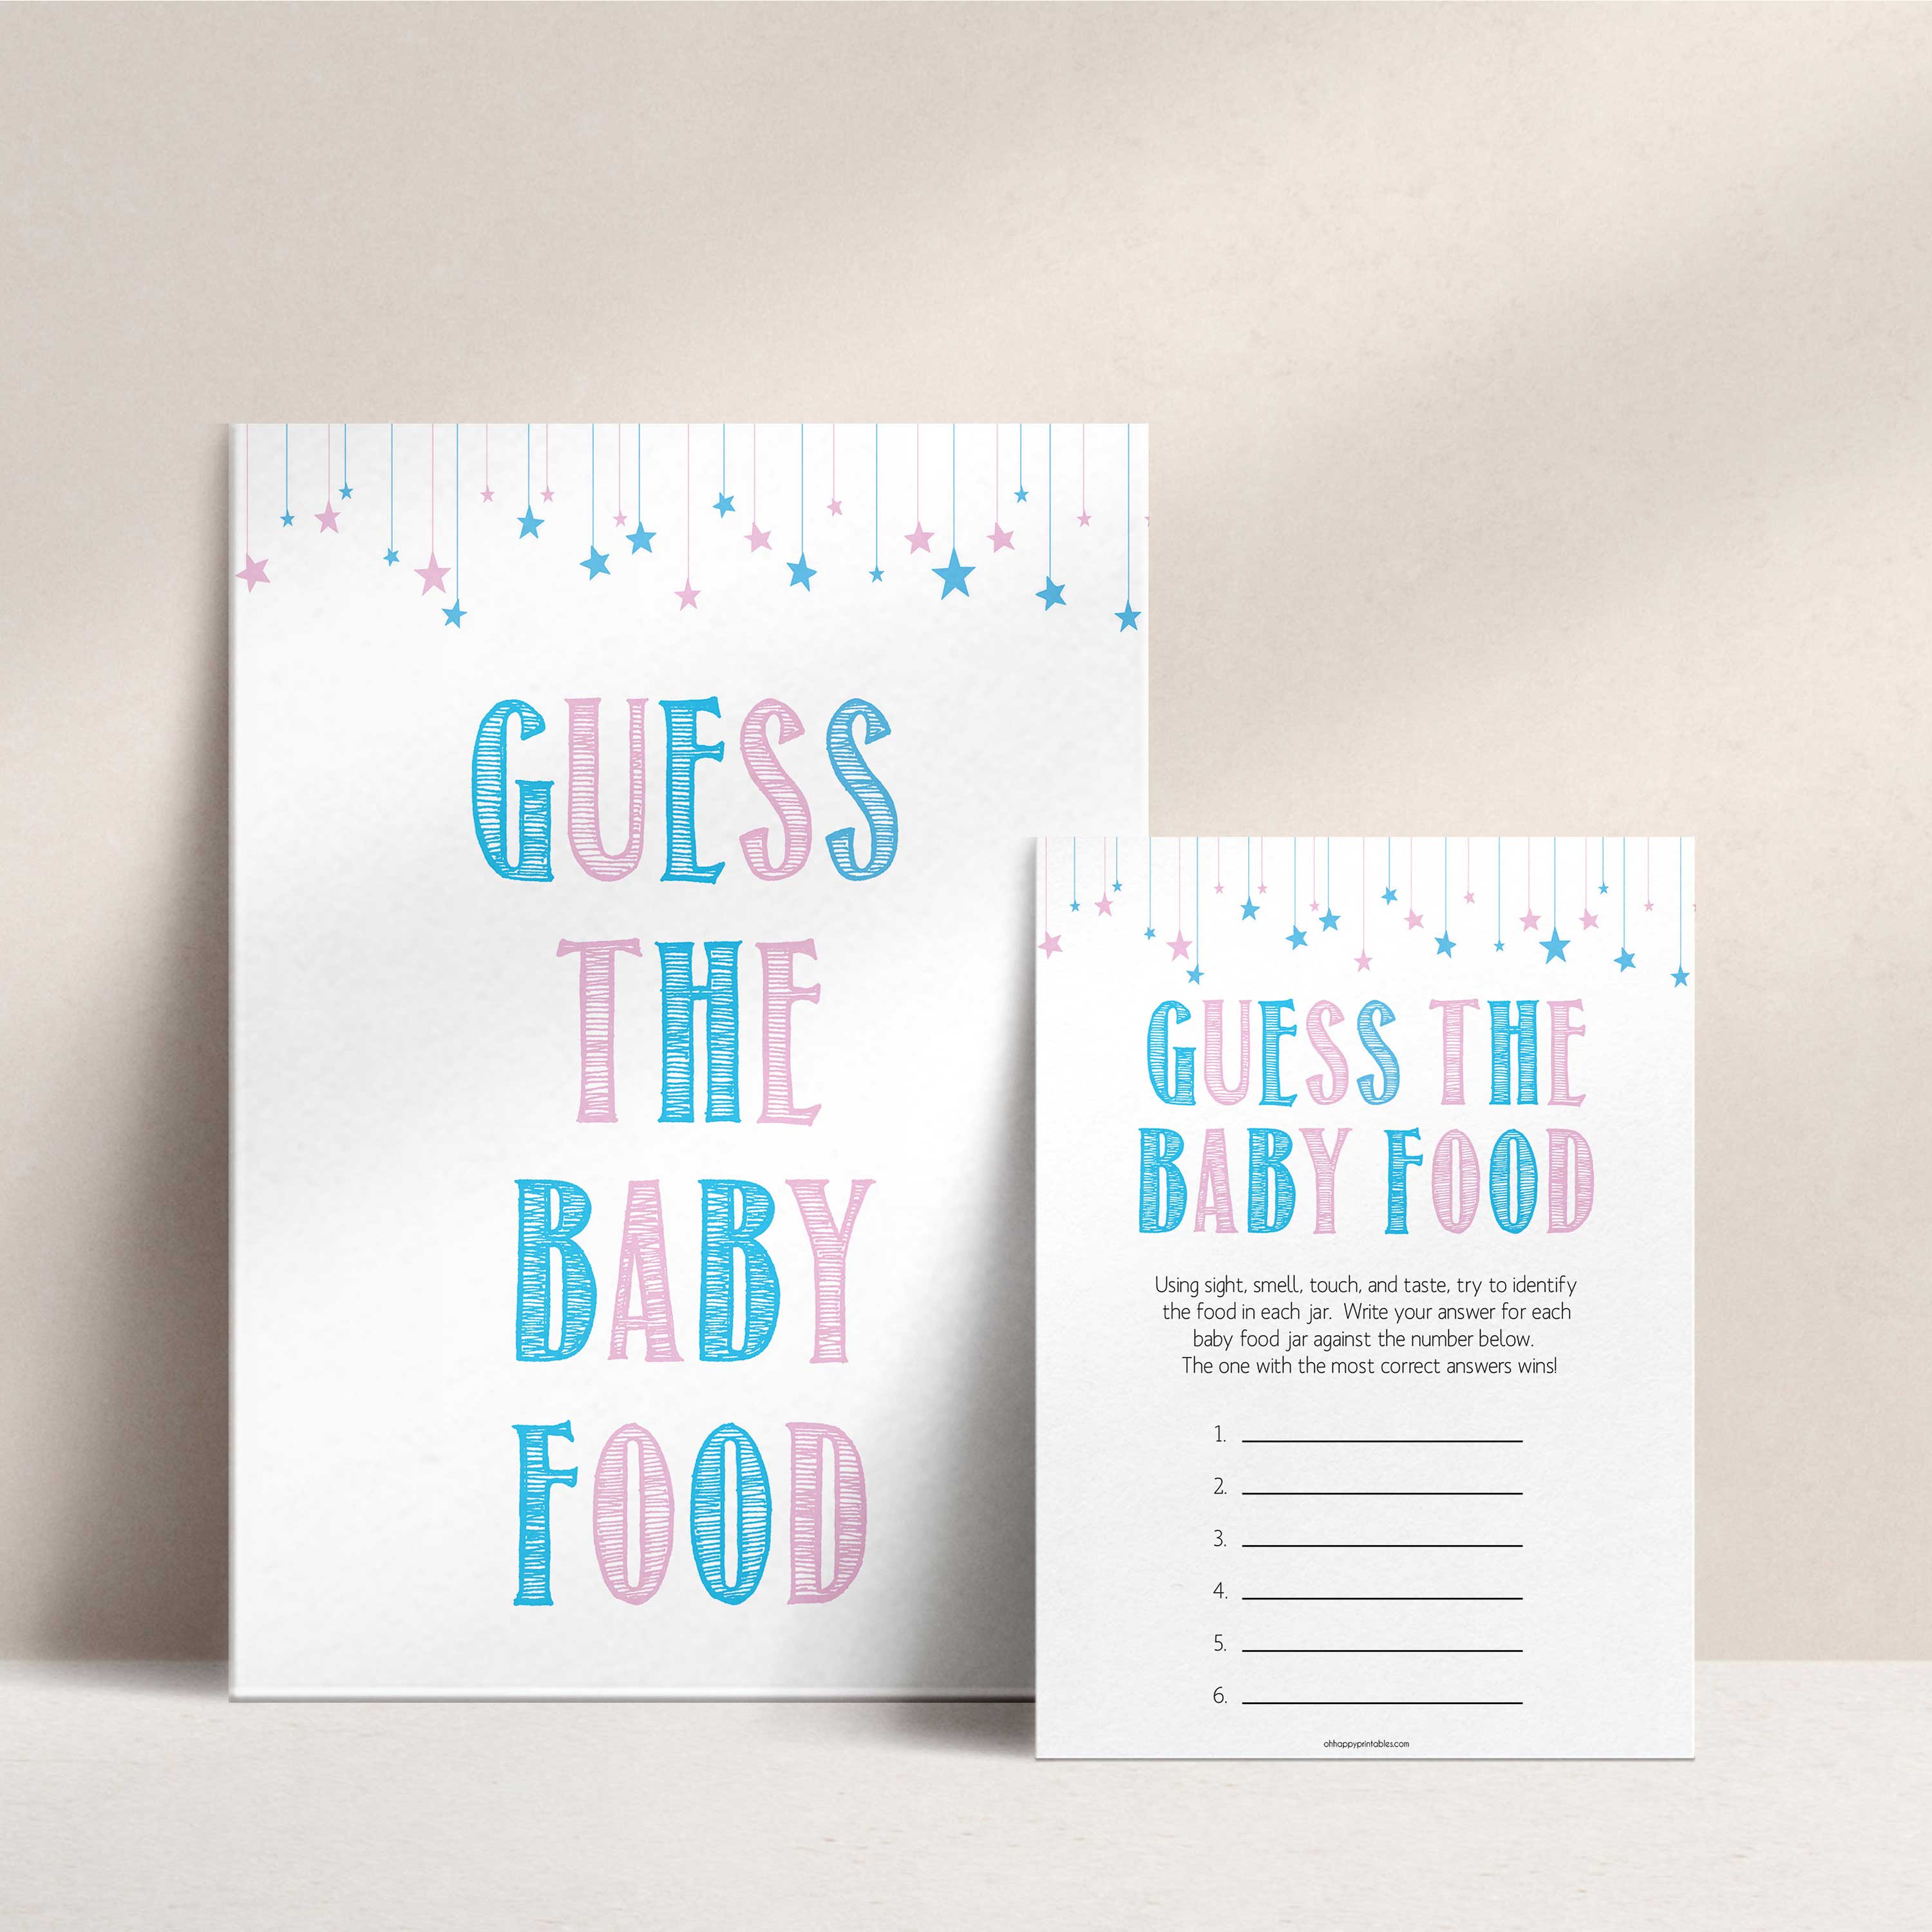 Gender reveal baby games, guess the baby food baby game, gender reveal shower, fun baby games, gender reveal ideas, popular baby games, best baby games, printable baby games, gender reveal baby games